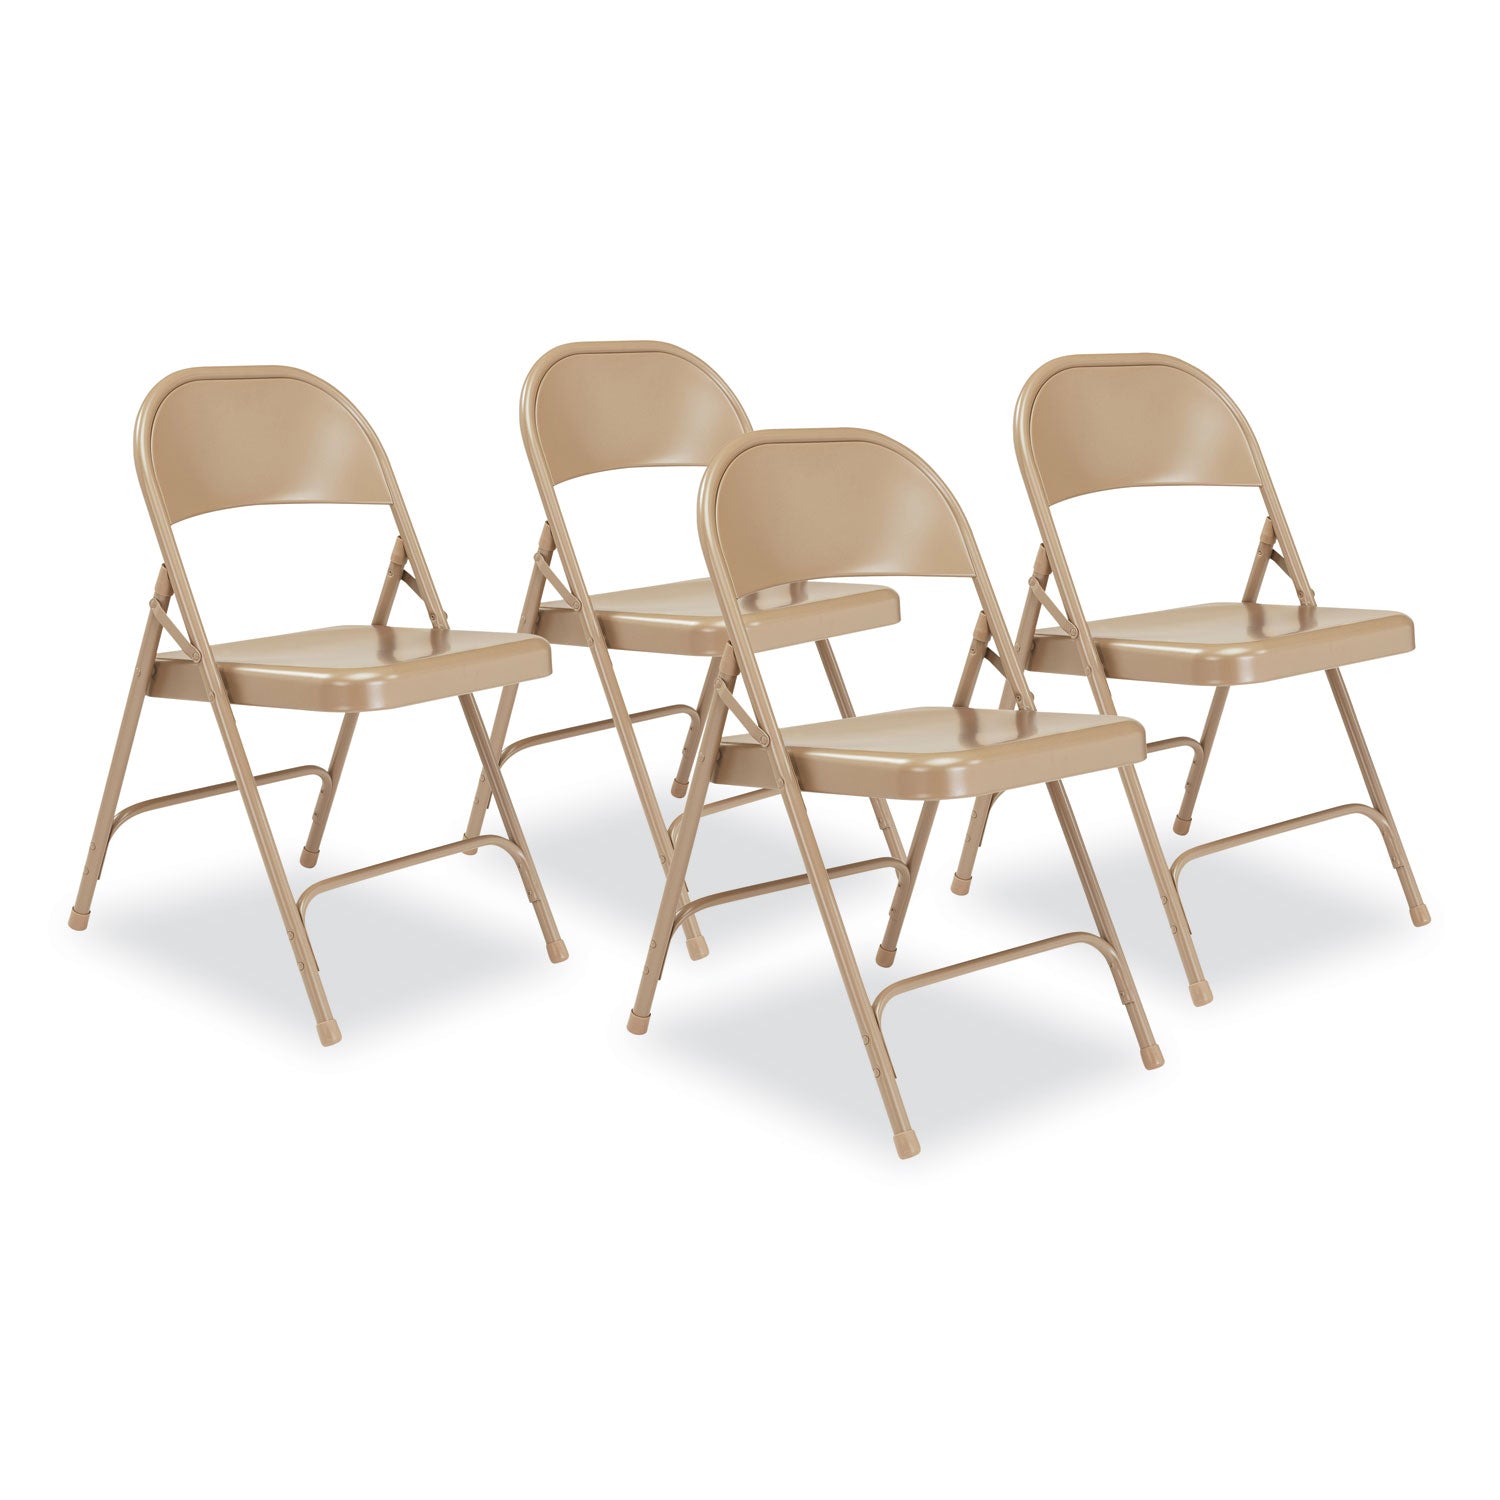 50-series-all-steel-folding-chair-supports-500-lb-1675-seat-ht-beige-seat-back-beige-base-4-ct-ships-in-1-3-bus-days_nps51 - 1